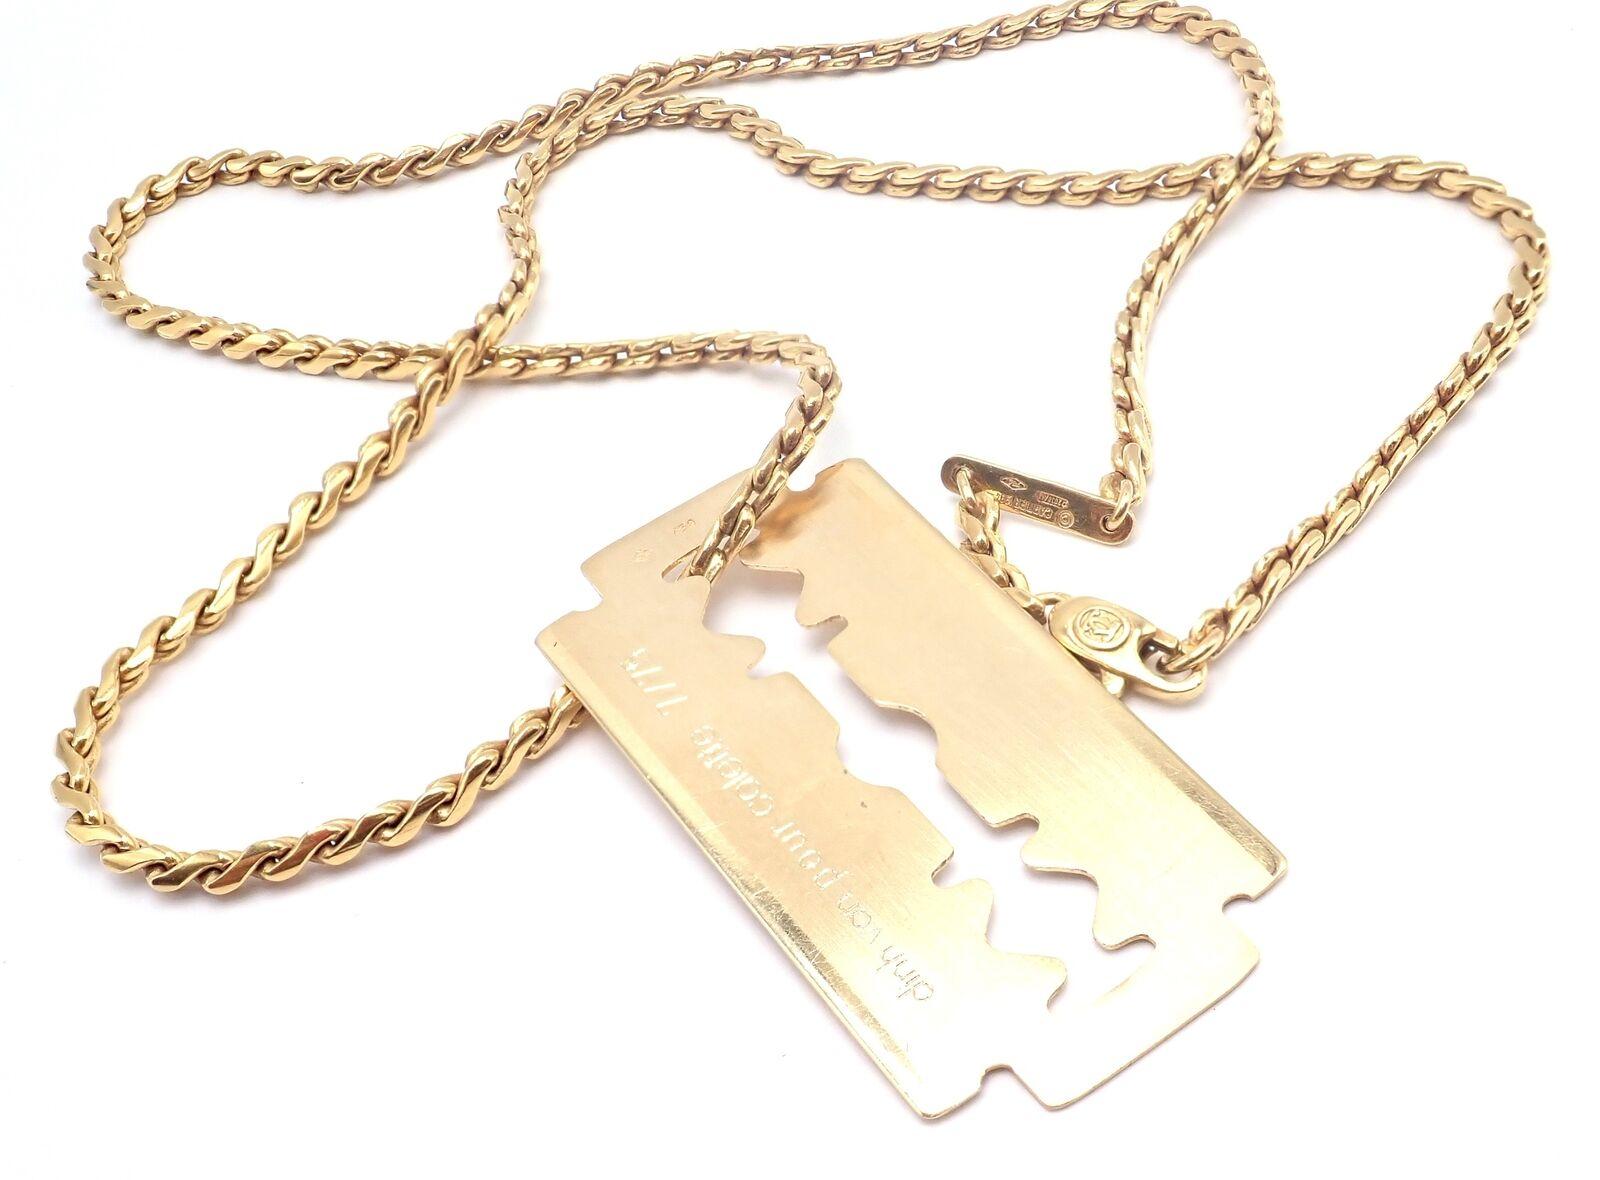 18k Yellow Gold Vintage Razor Blade Yellow Gold Pendant Chain Necklace by Dinh Van and Cartier. 
Details: 
Length: 19.5